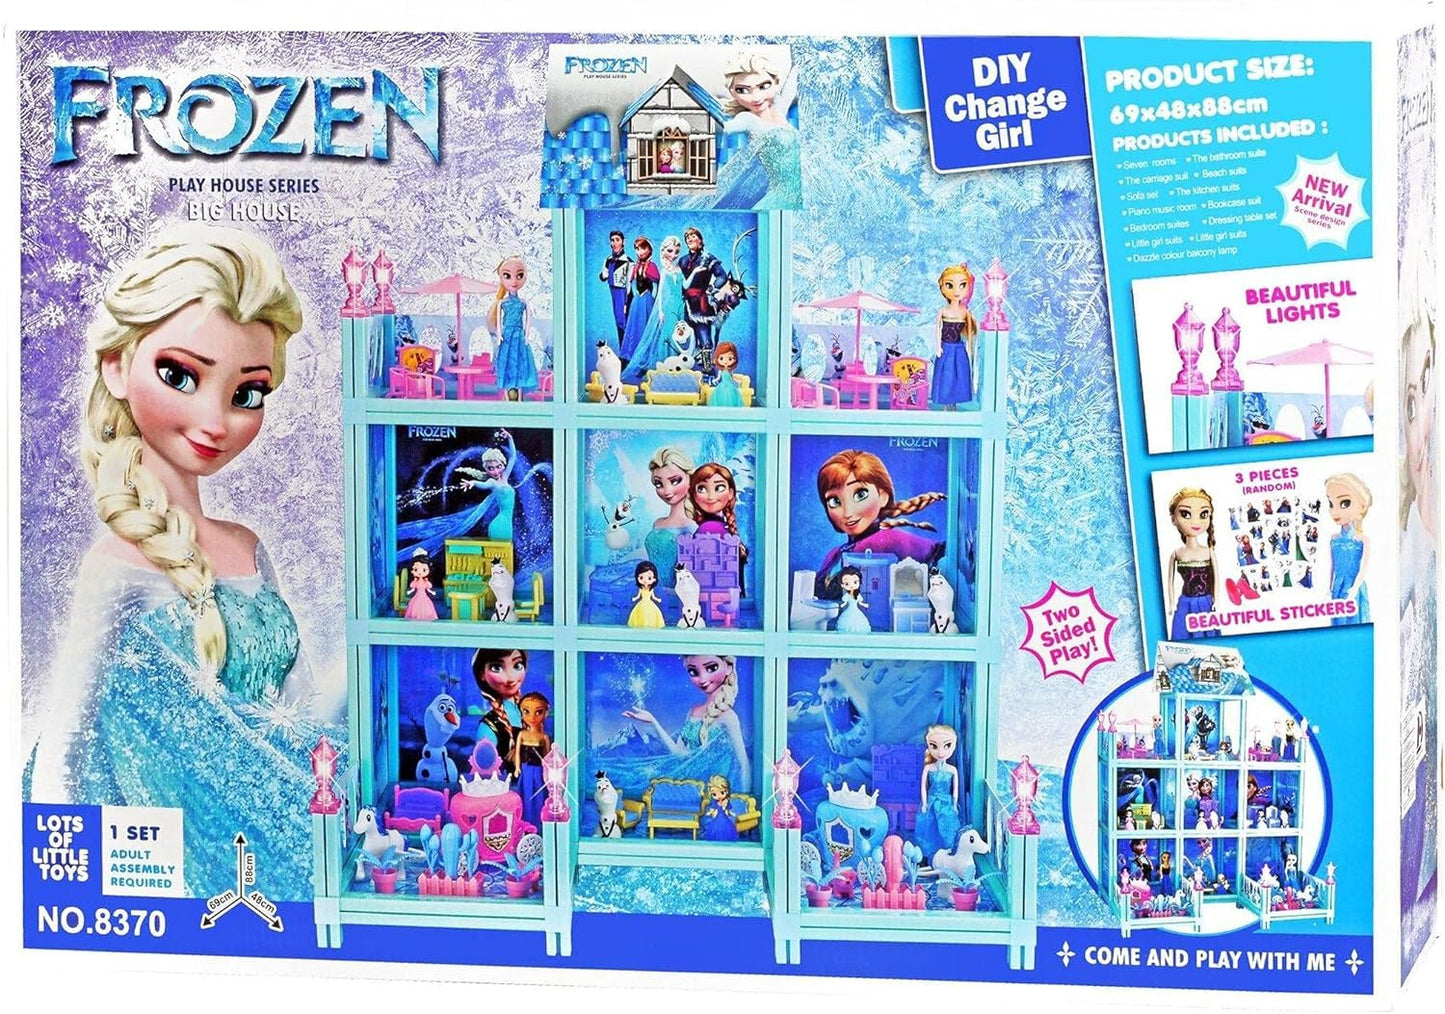 Frozen DIY Dollhouse Building Playset - Pink Dreamhouse with Dolls and Accessories